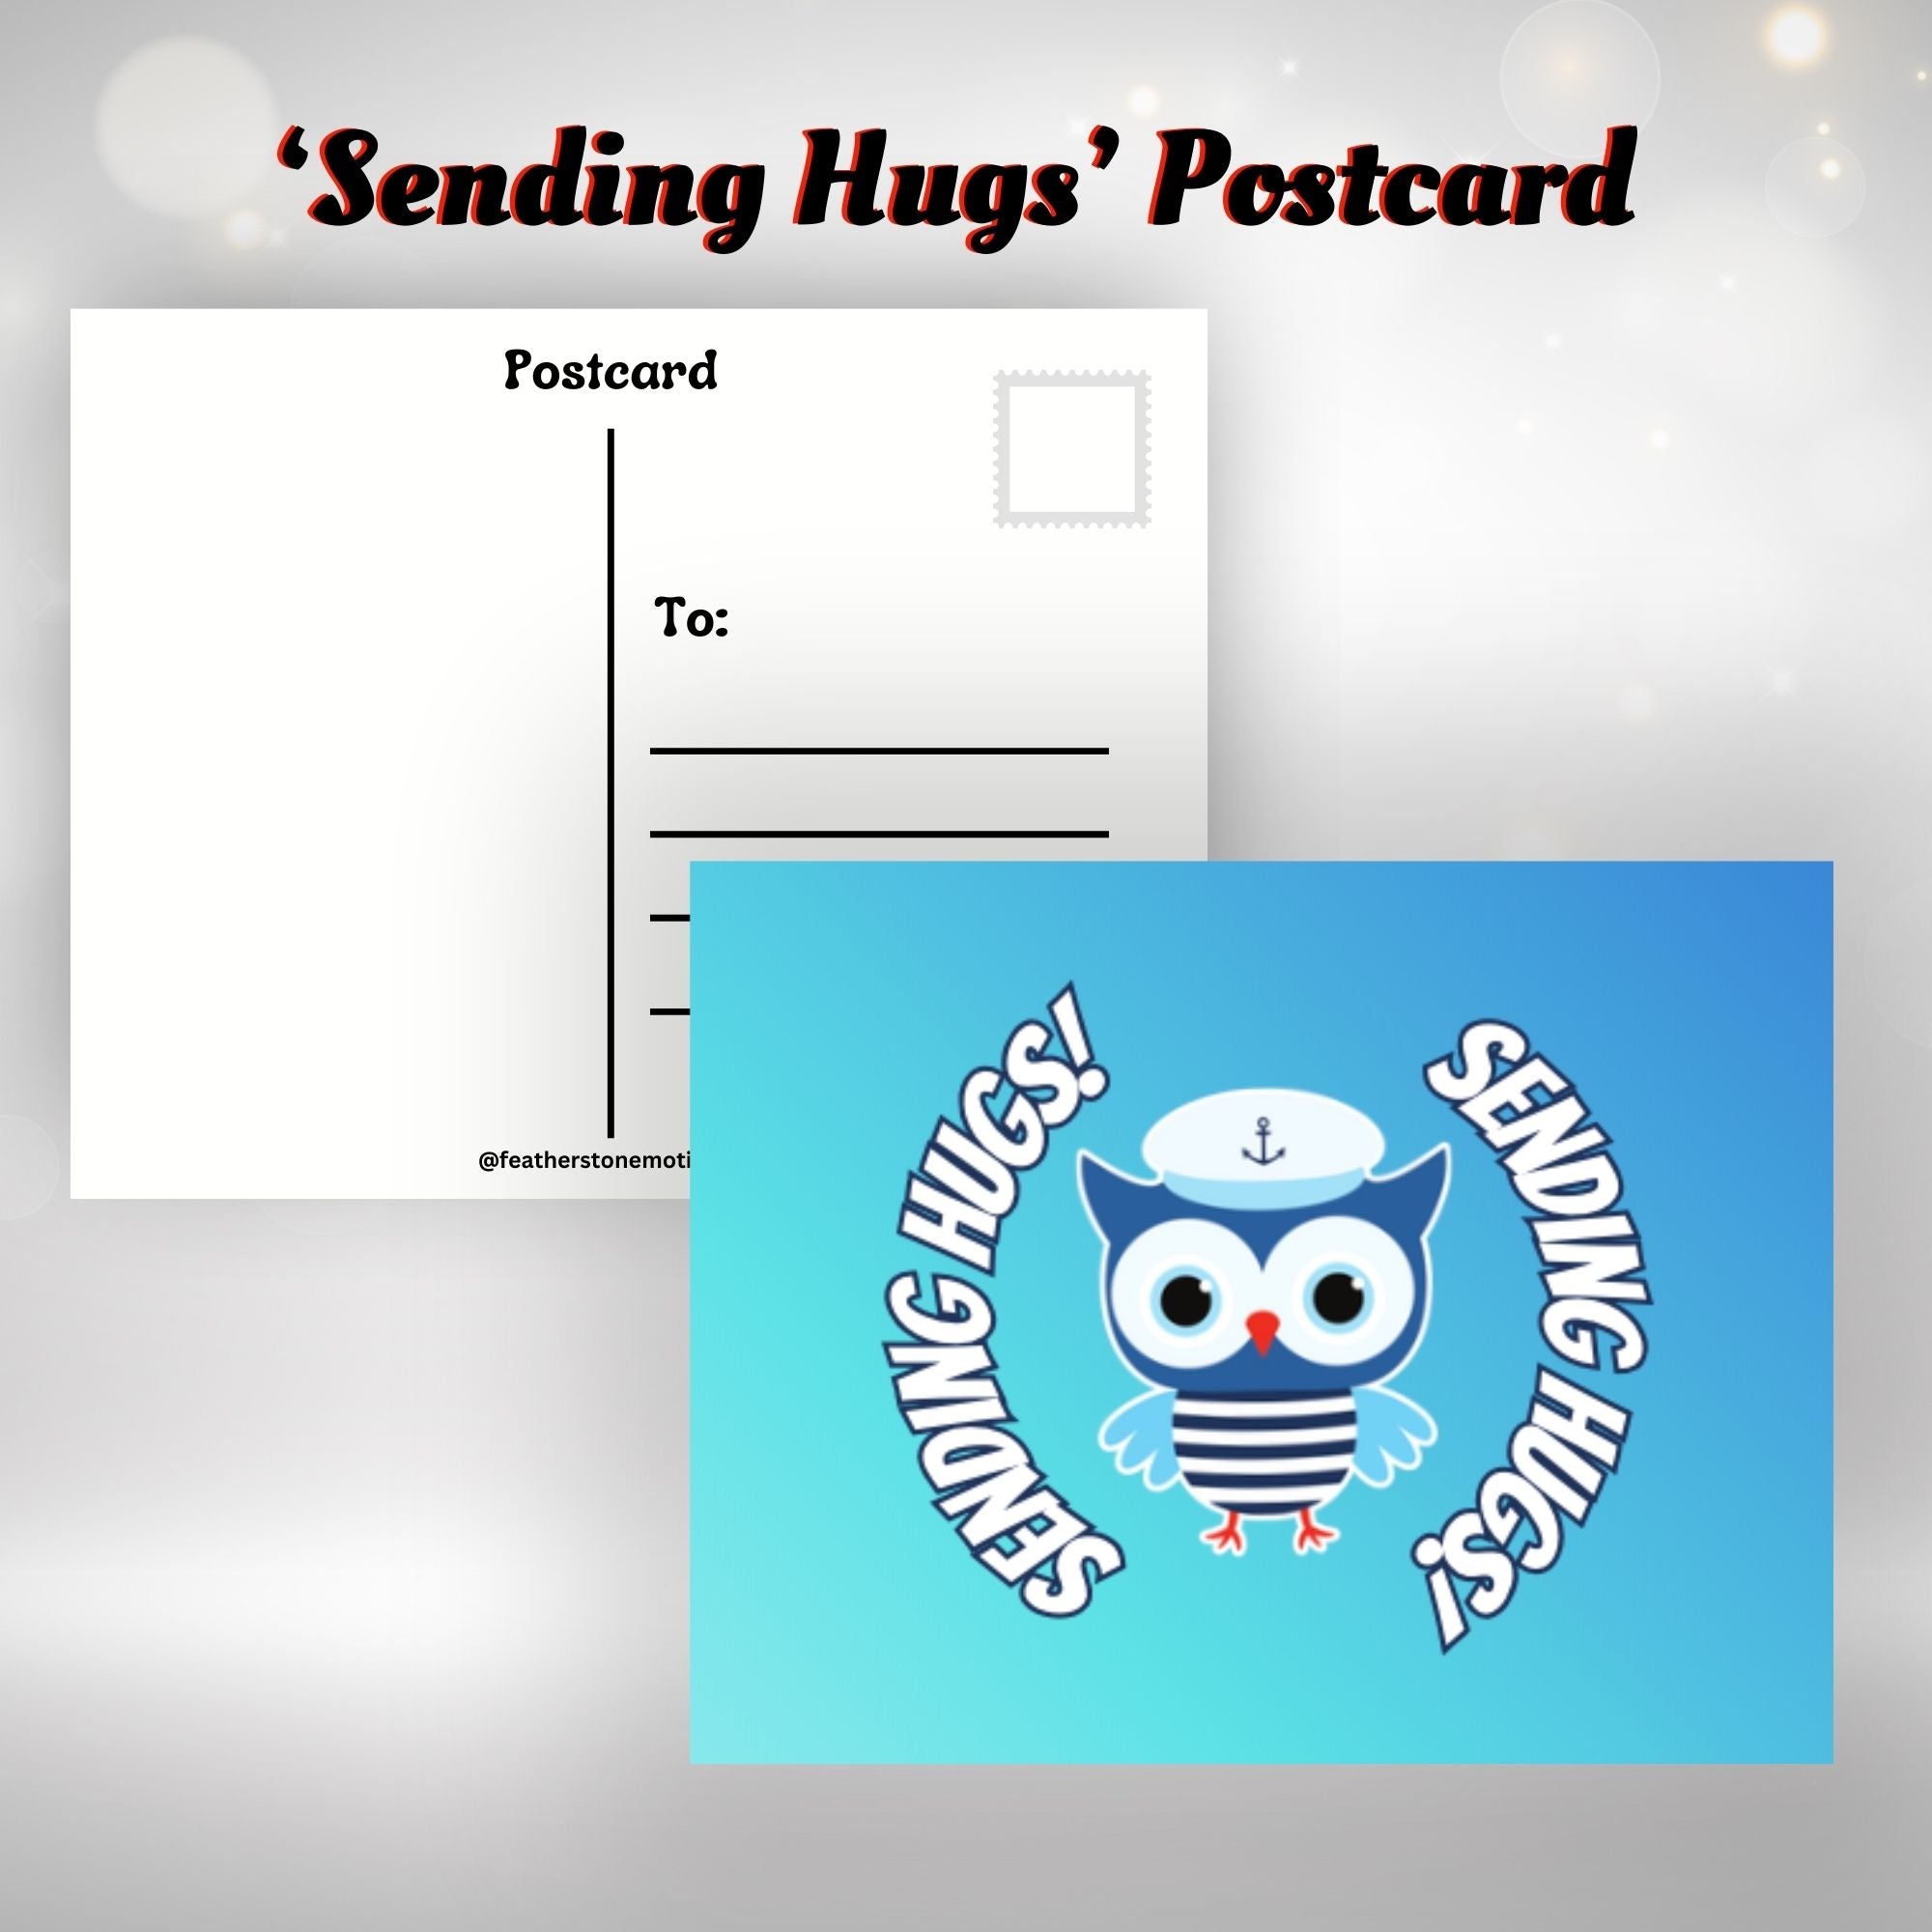 This image shows the Sending Hugs! postcard with a nautical themed owl in the center.